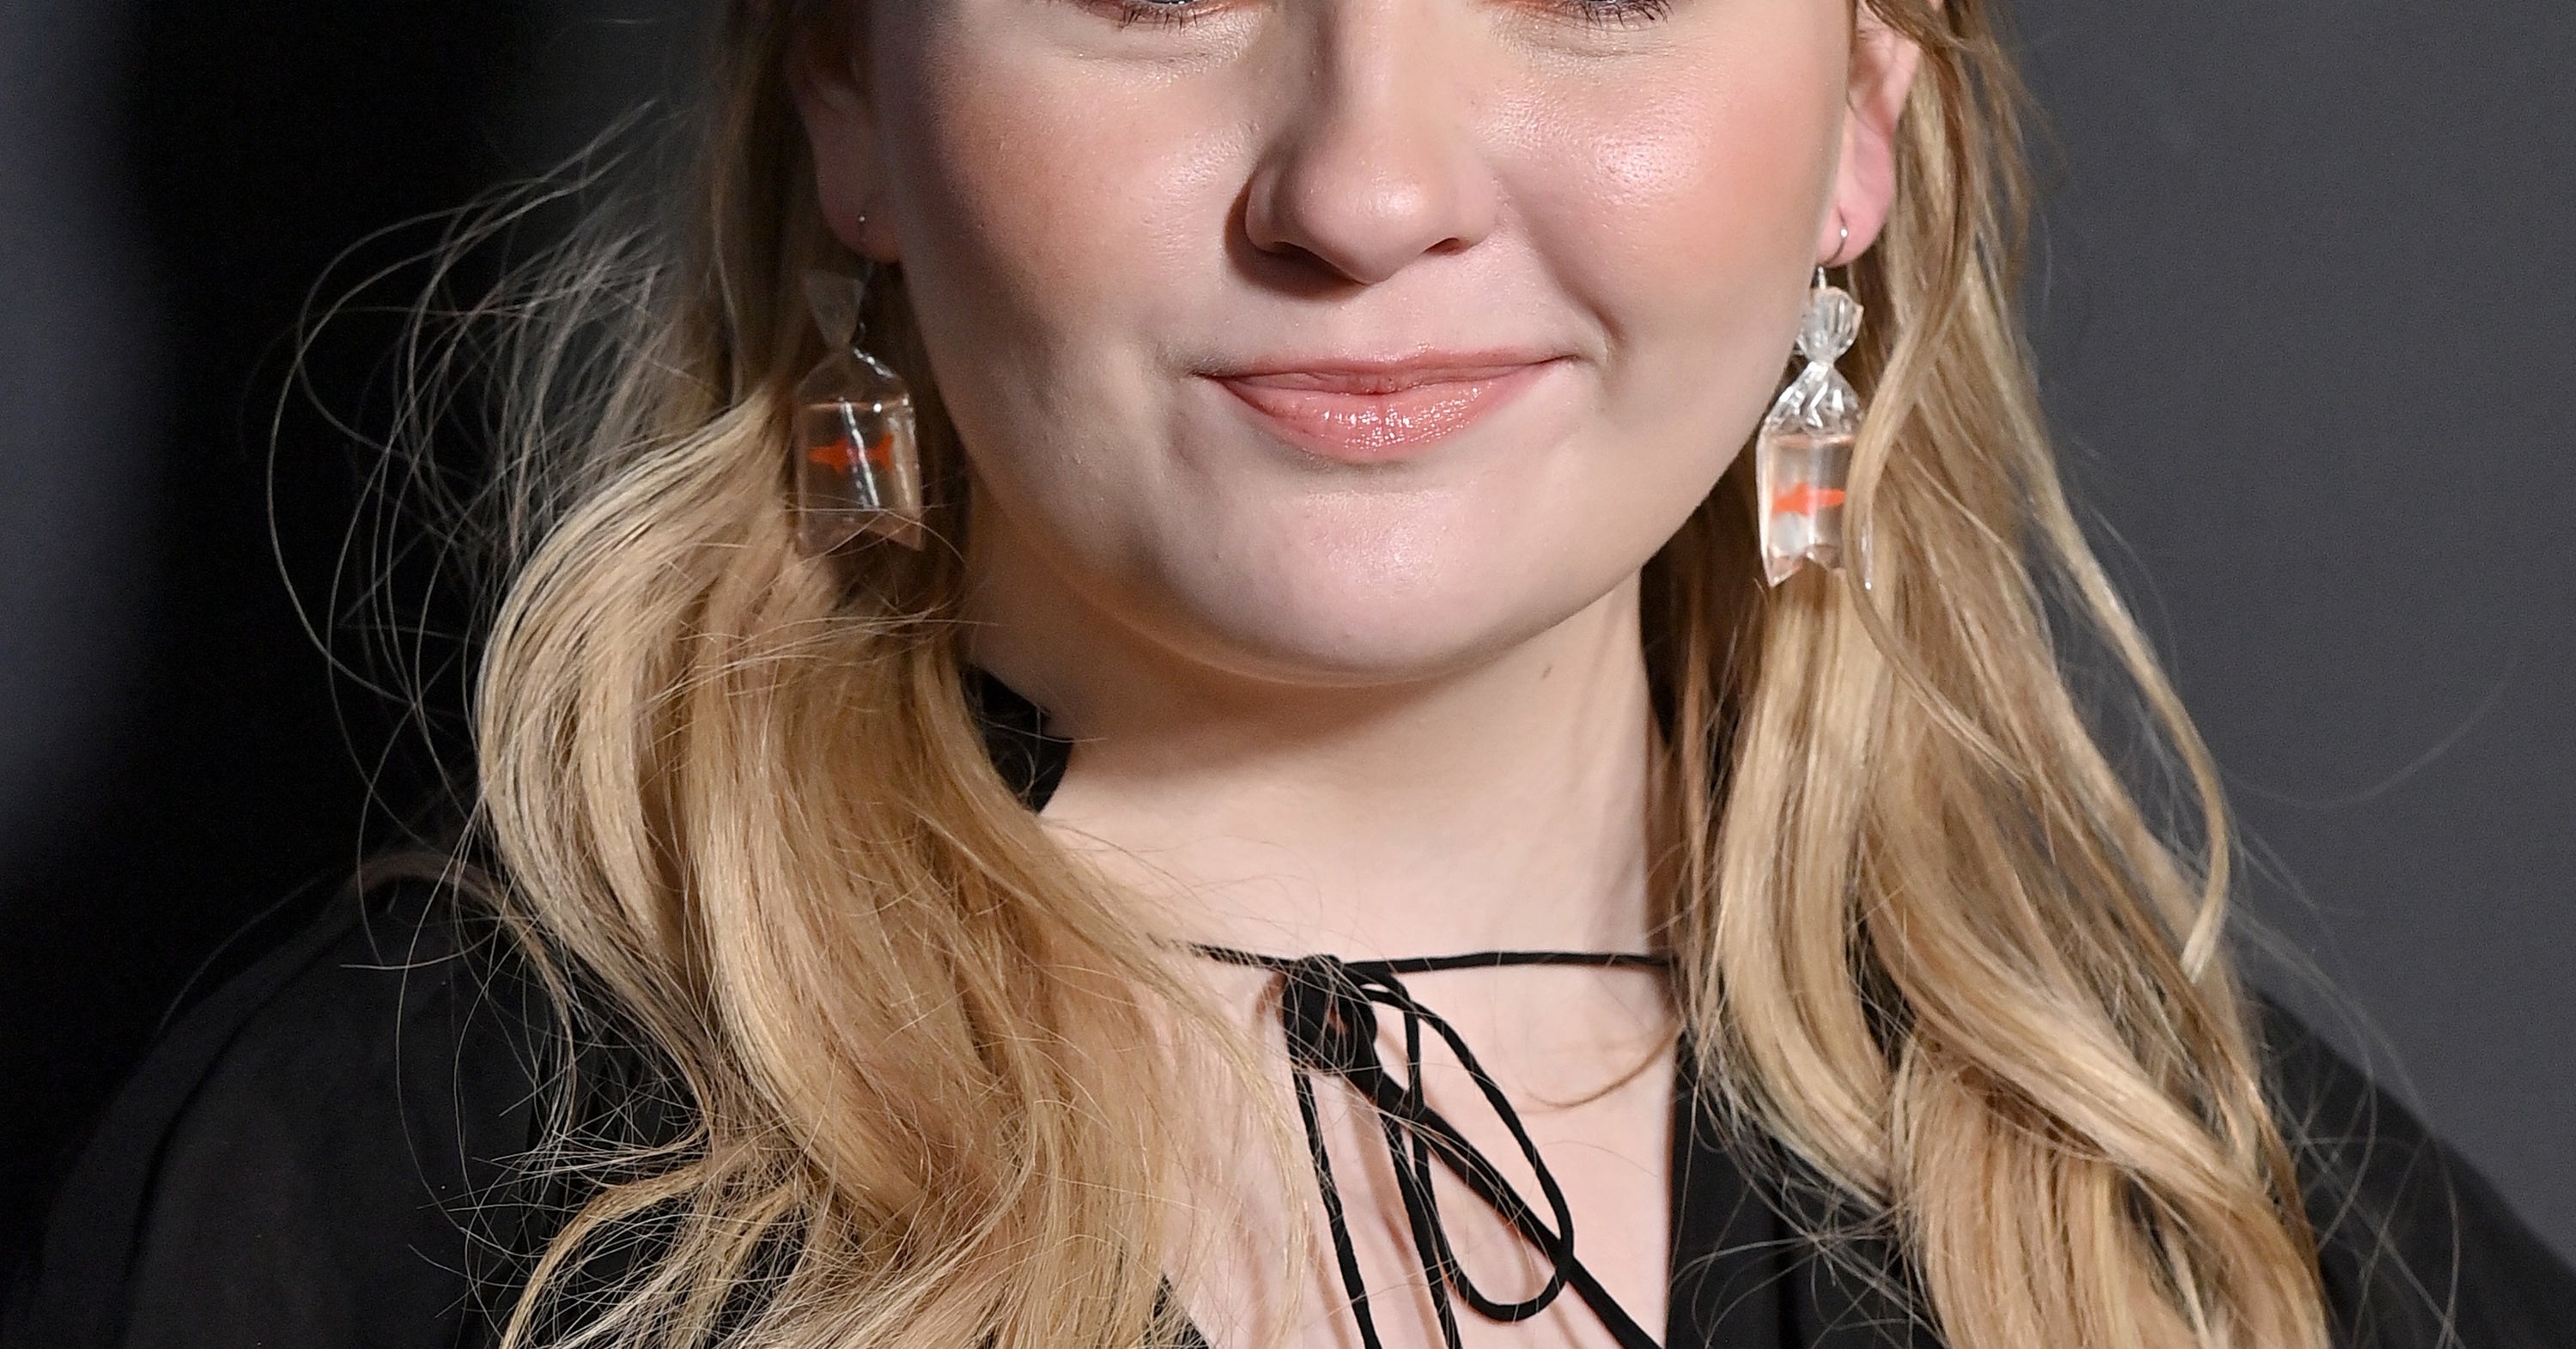 Abigail Breslin Detailed The "Violent" And "Abusive" Relationship She Was In For Almost Two Years While Talking About Surviving Domestic Violence